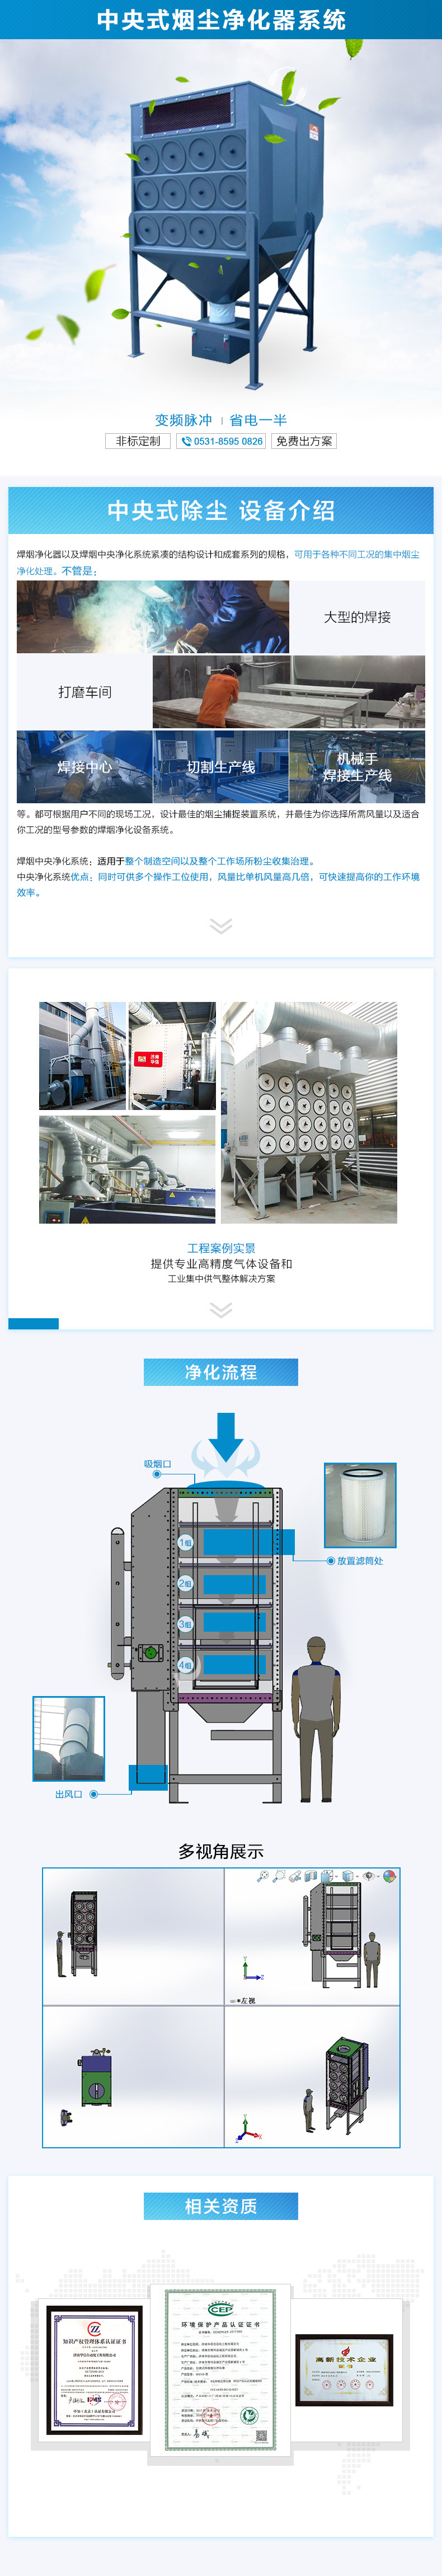 Full Automatically Cleaning Economical Central Fume Extractor Series Machine